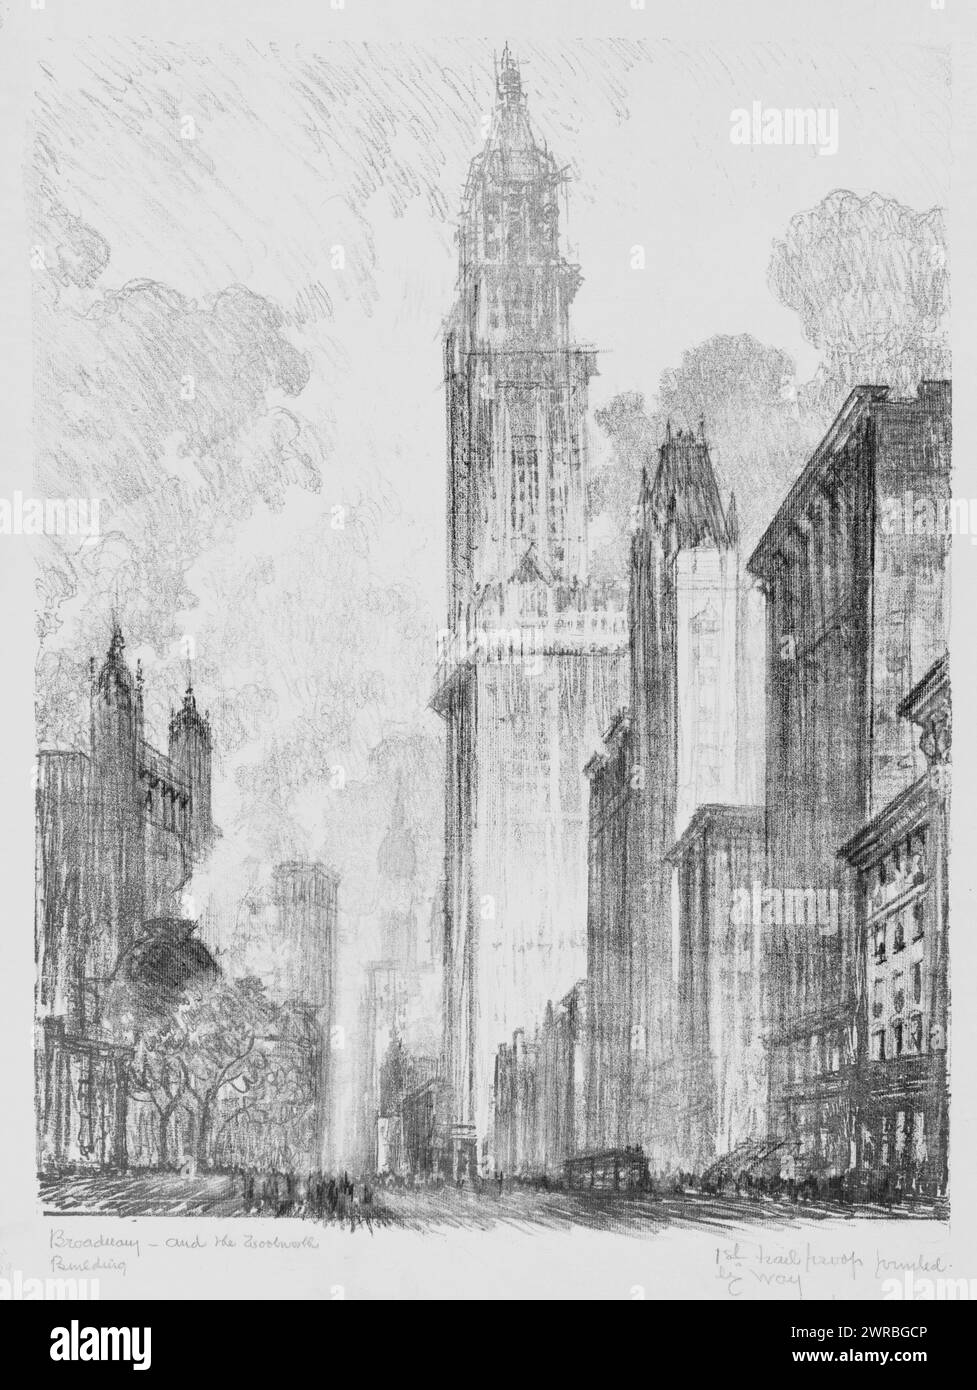 Broadway and the Woolworth Building, J. Pennell., Buildings, including the Woolworth Building under construction, along Broadway., Pennell, Joseph, 1857-1926, artist, 1912., Woolworth Building (New York, N.Y.), 1910-1920, Lithographs, 1910-1920., Lithographs, 1910-1920, 1 print: lithograph Stock Photo